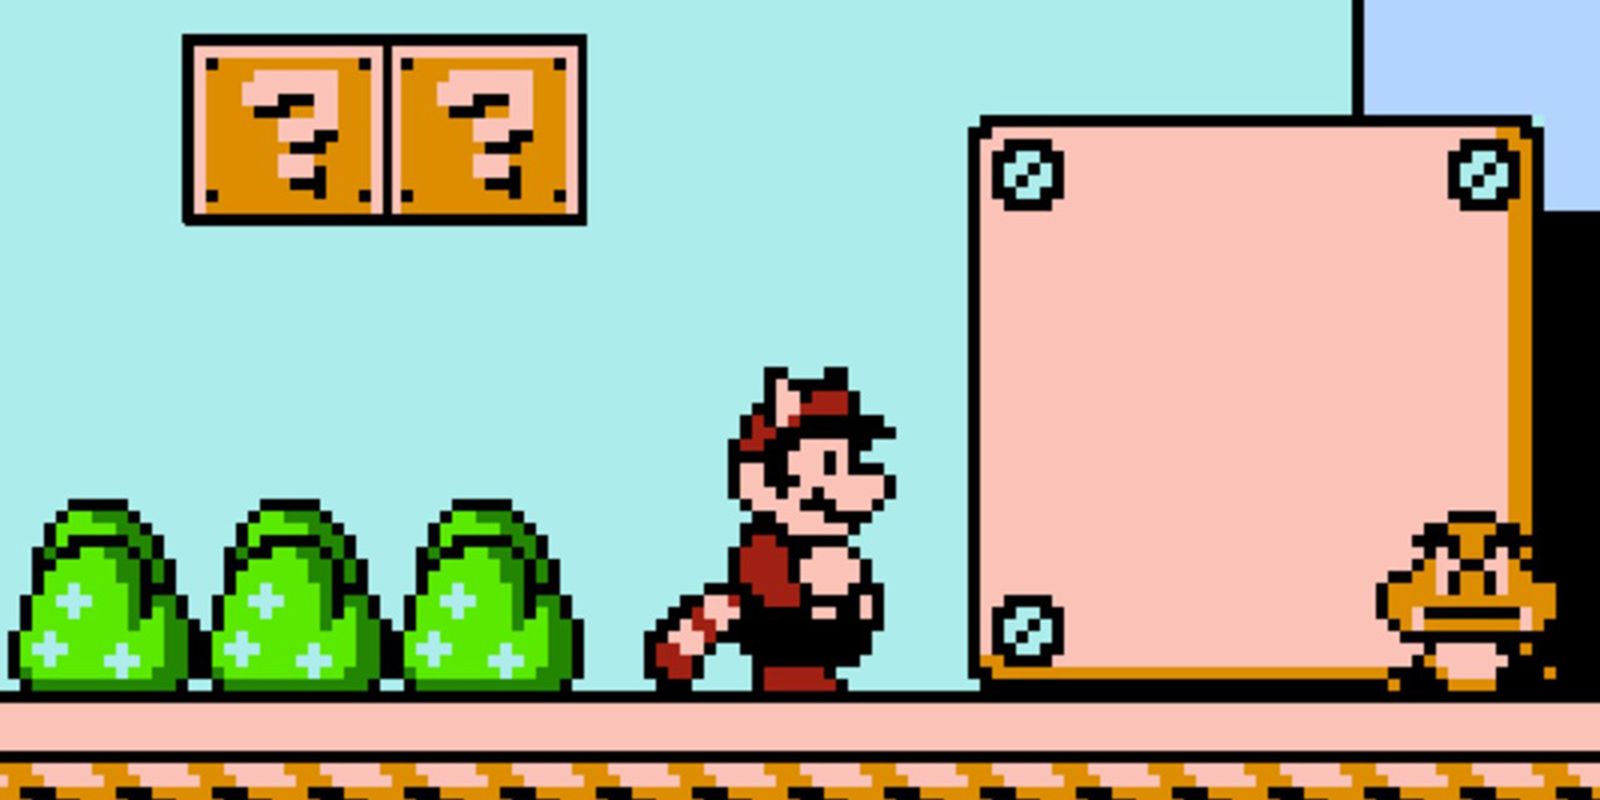 The opening level of Super Mario Bros. 3, featuring a Tanooki suit and a goomba.